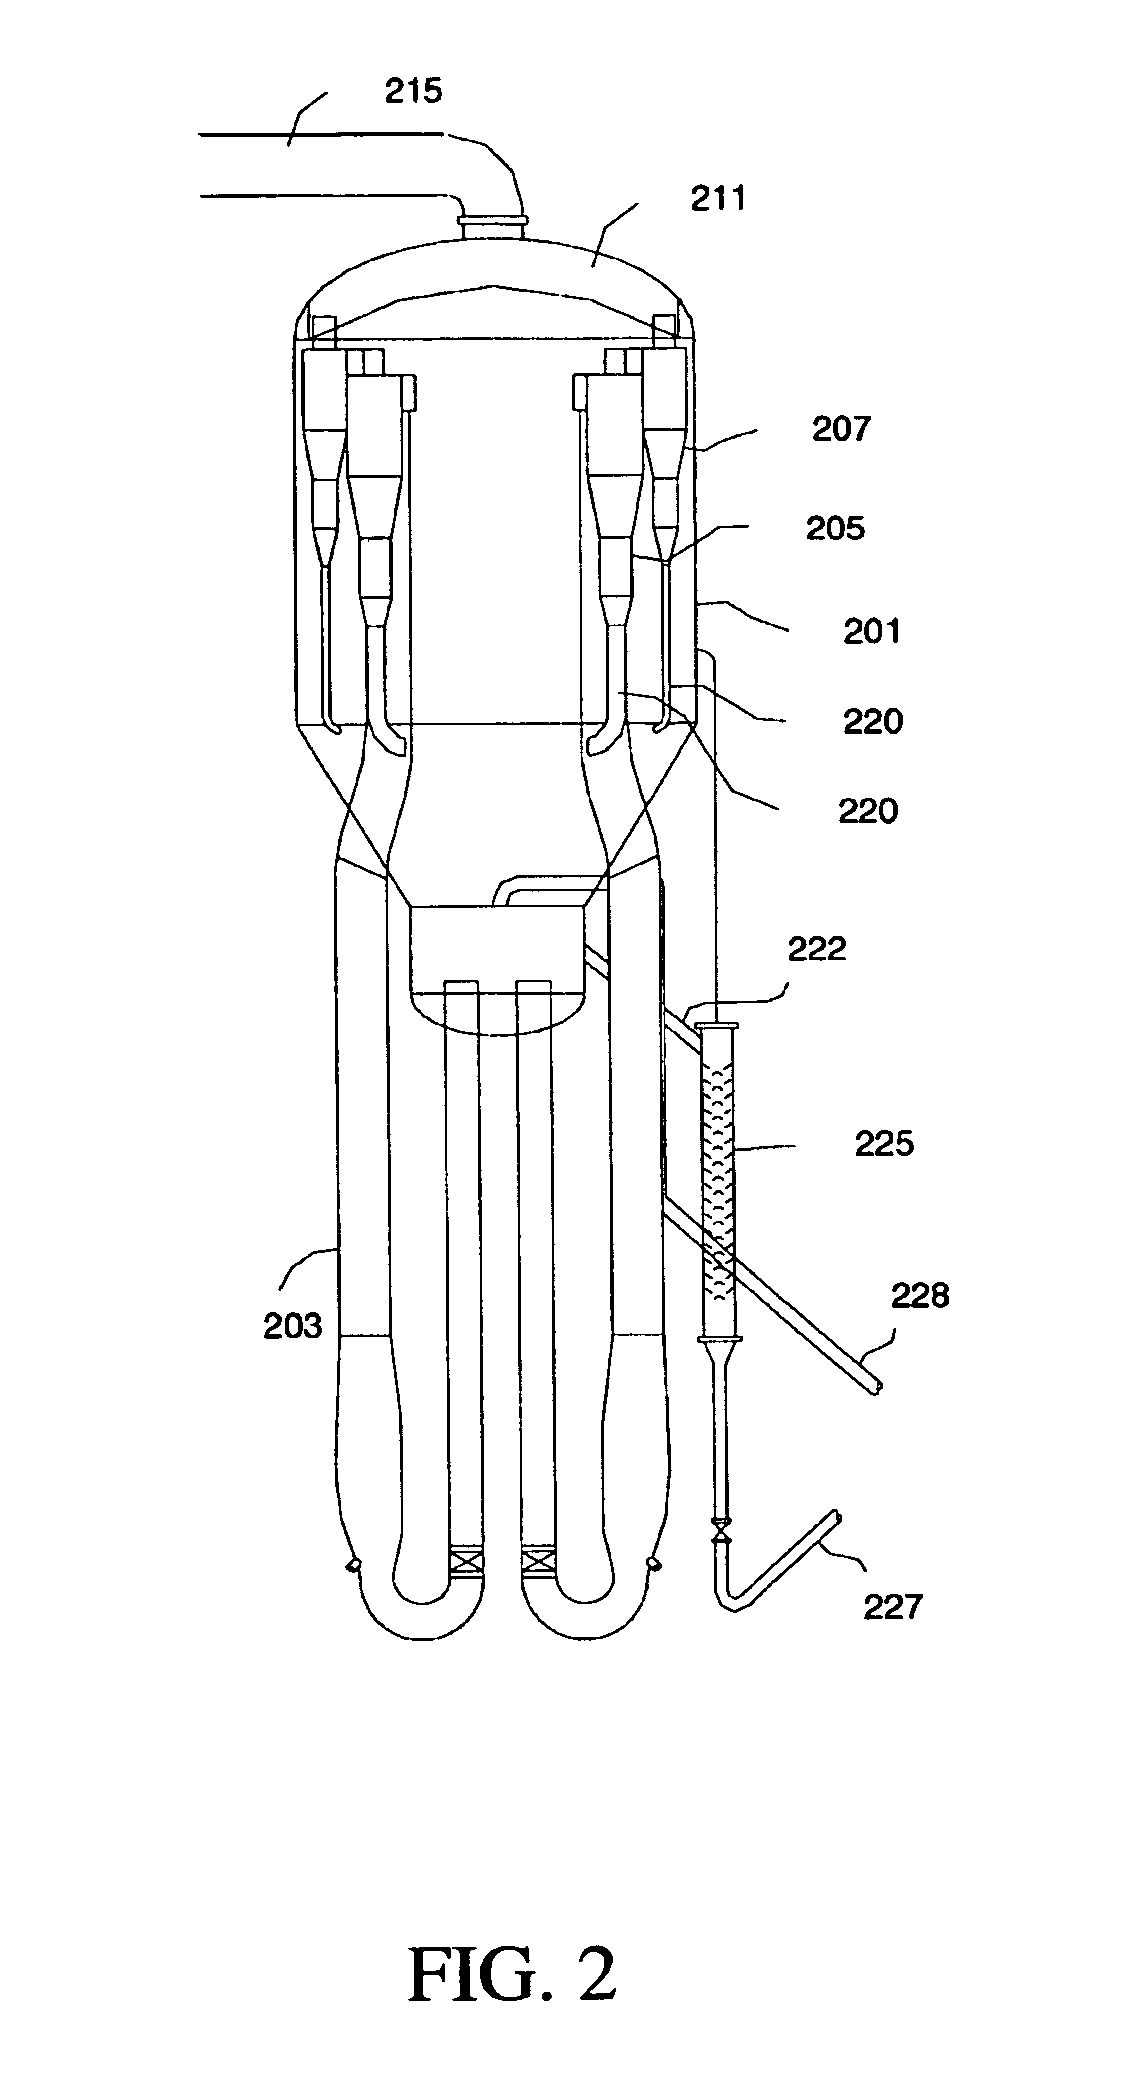 Riser termination devices for reduced catalyst attrition and losses